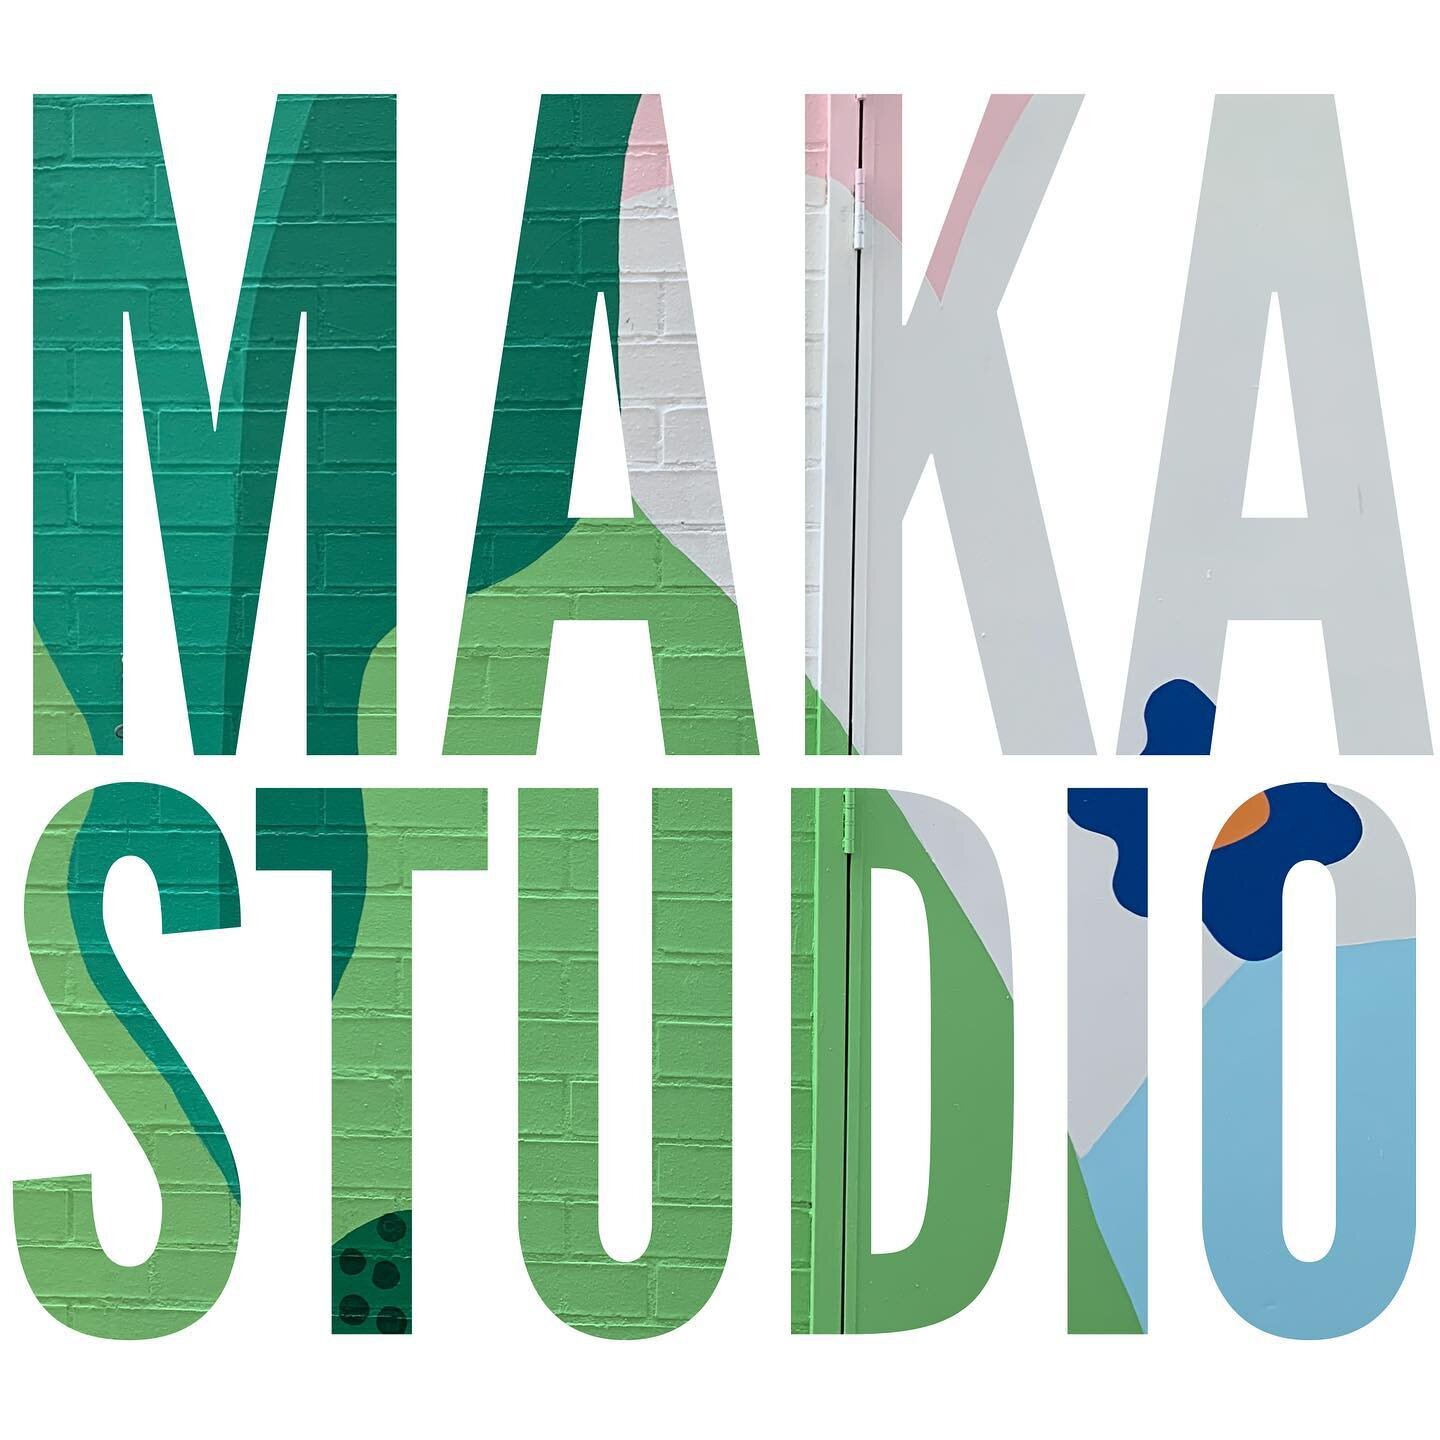 MAKA sessions return NEXT WEDNESDAY at 5.15-6.30pm for Term 2!
🪚
We&rsquo;ve got a 🔥warm and fuzzy🔥 theme this term as the cooler weather drifts in. 
&hellip;think:
- melting
- felting
- shrinking
- wrinkling
- drilling
- milling
- branding
- sand